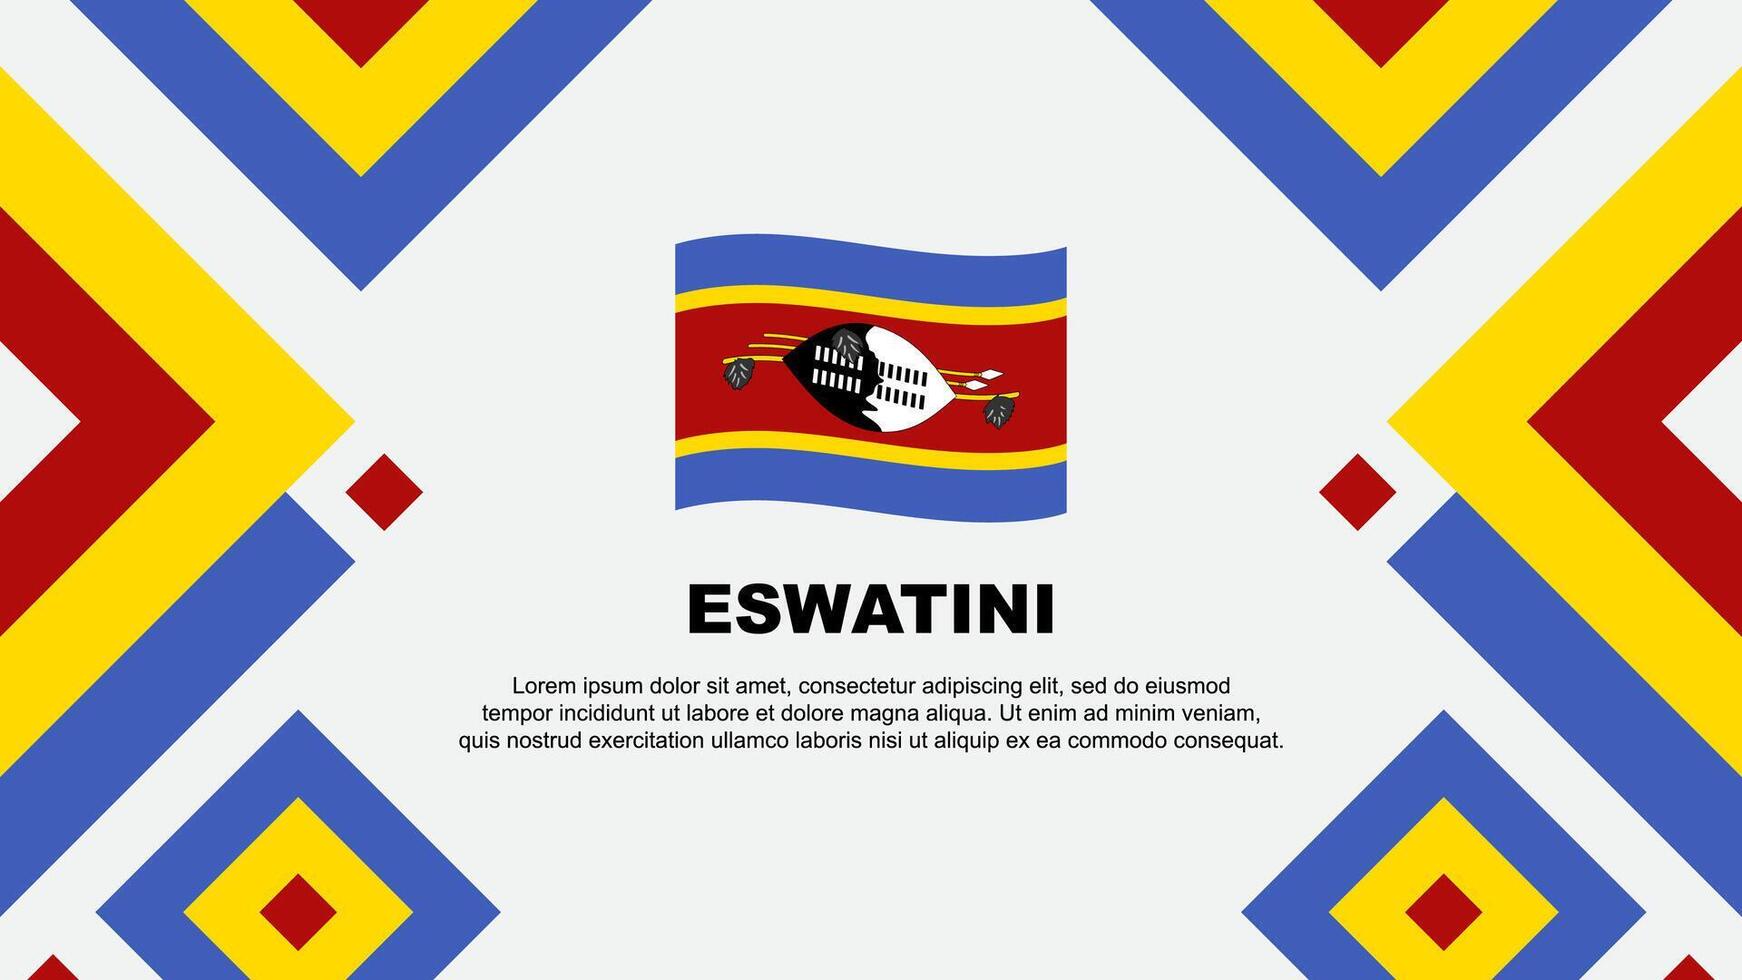 Eswatini Flag Abstract Background Design Template. Eswatini Independence Day Banner Wallpaper Vector Illustration. Eswatini Template